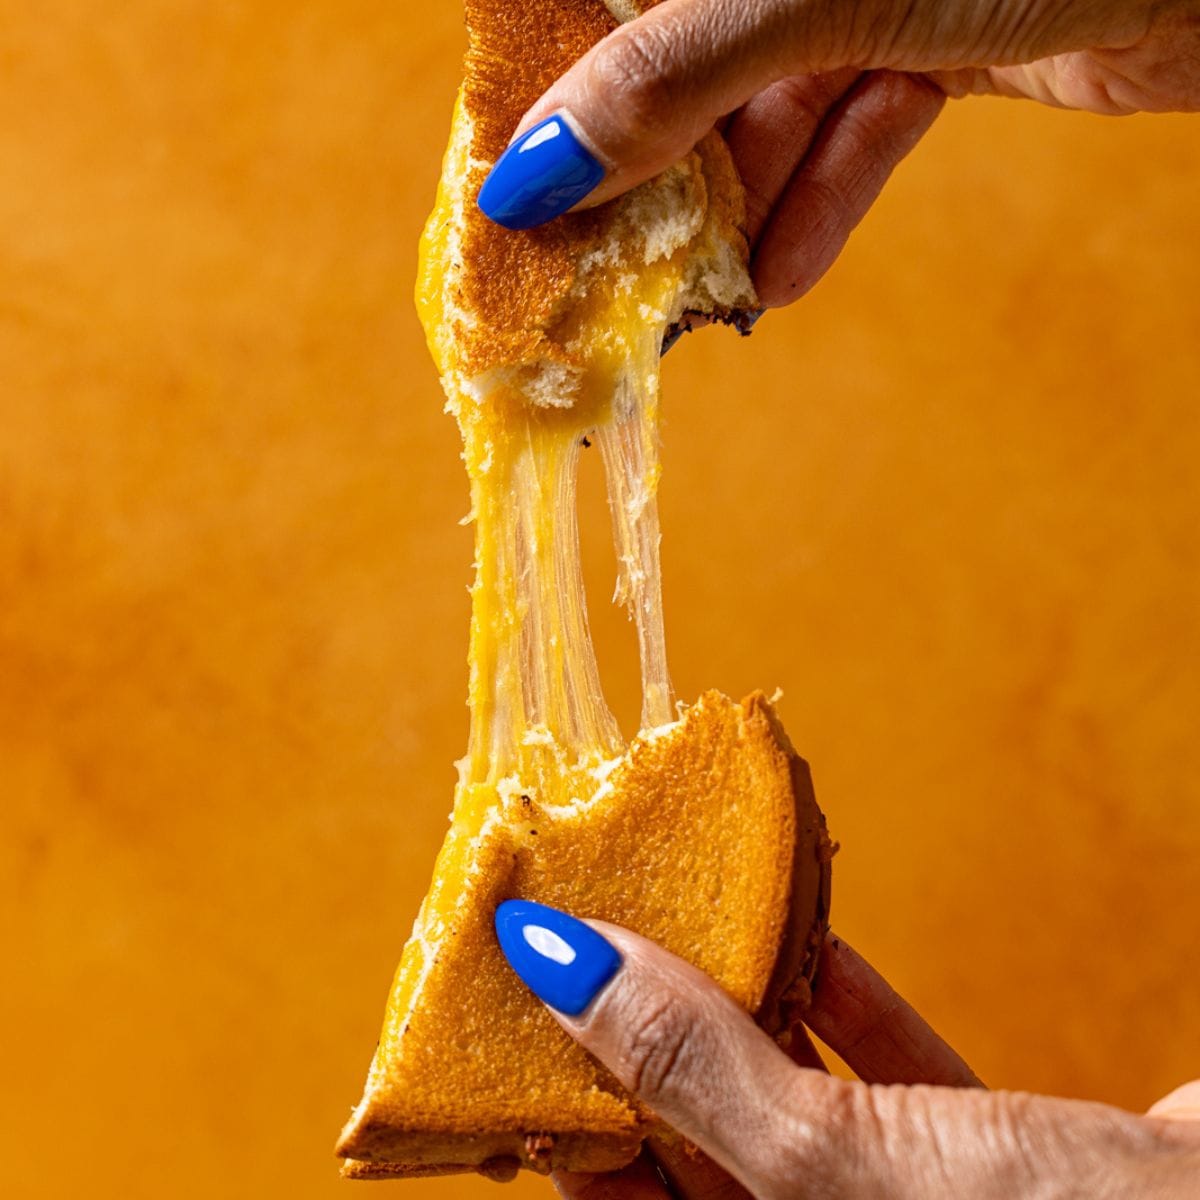 Grilled cheese being pulled apart held in hand.